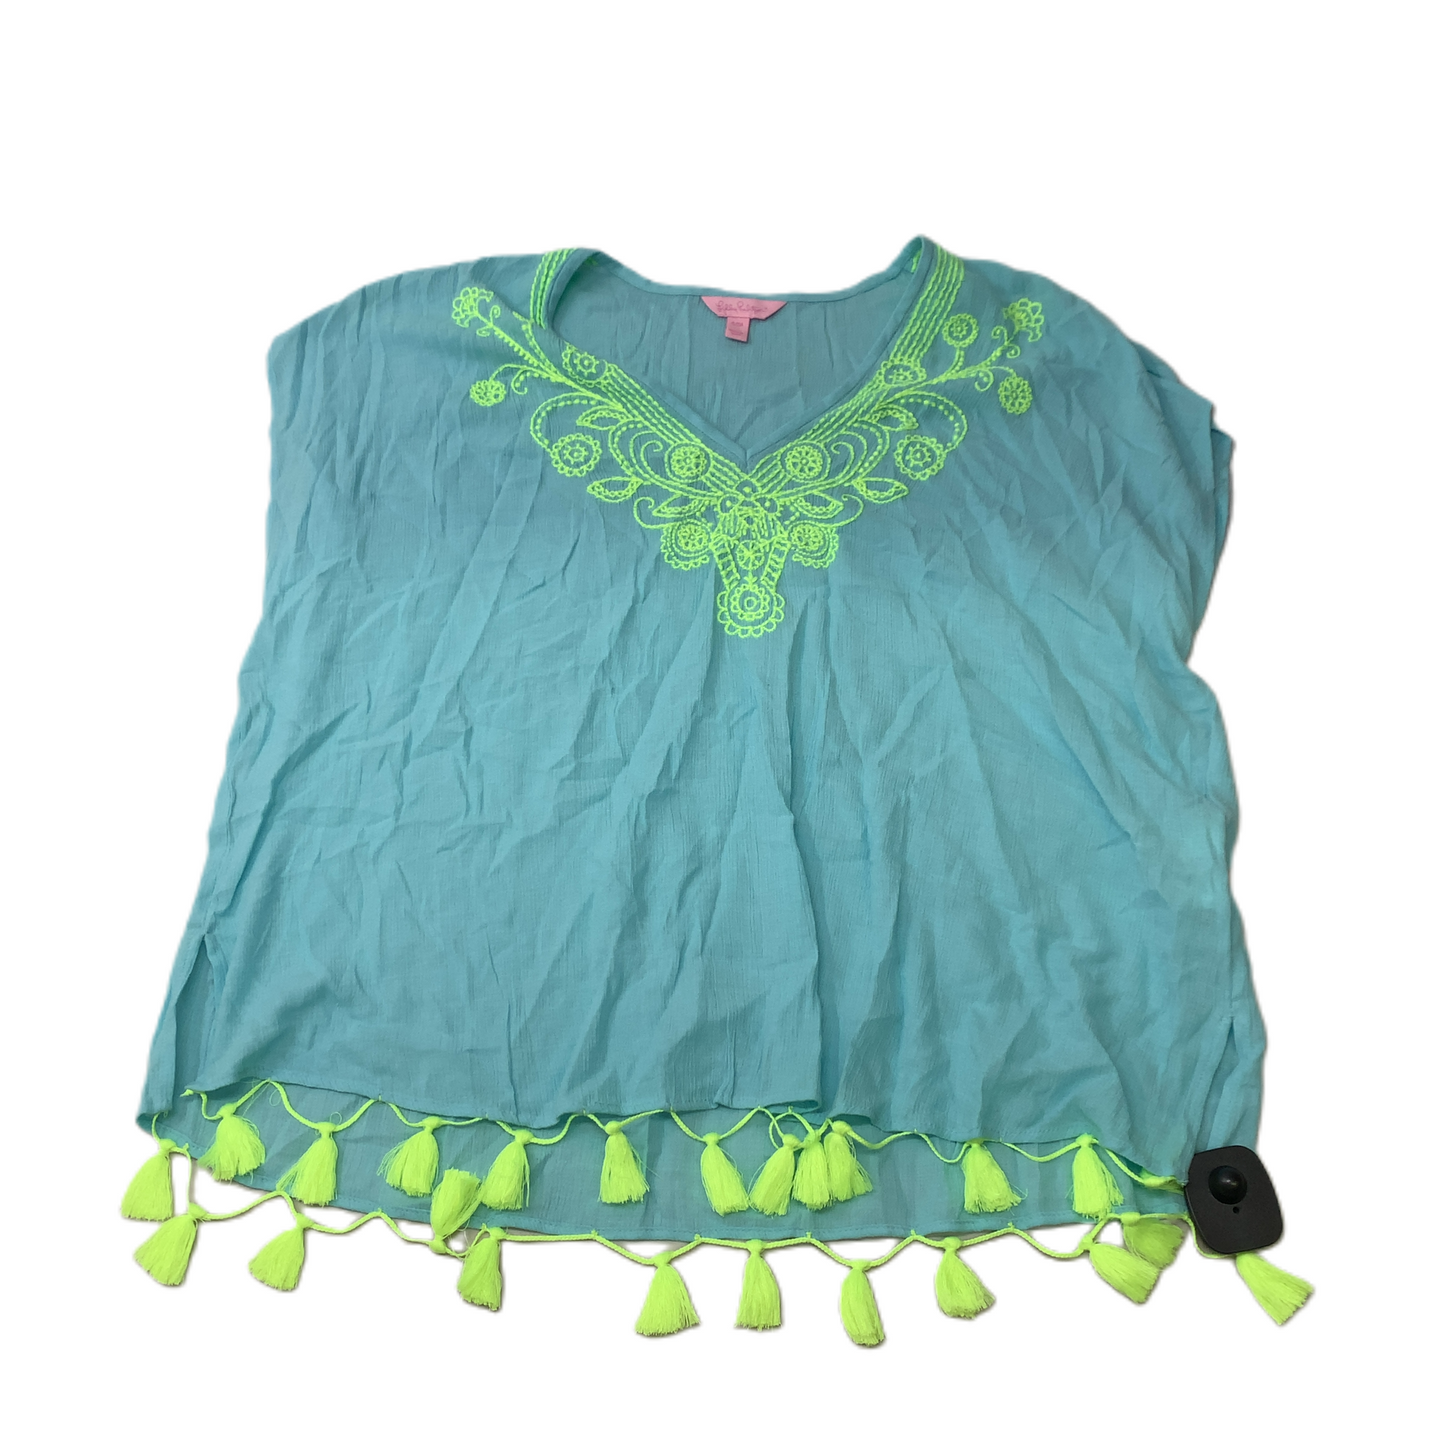 Blue & Green  Top Short Sleeve Designer By Lilly Pulitzer